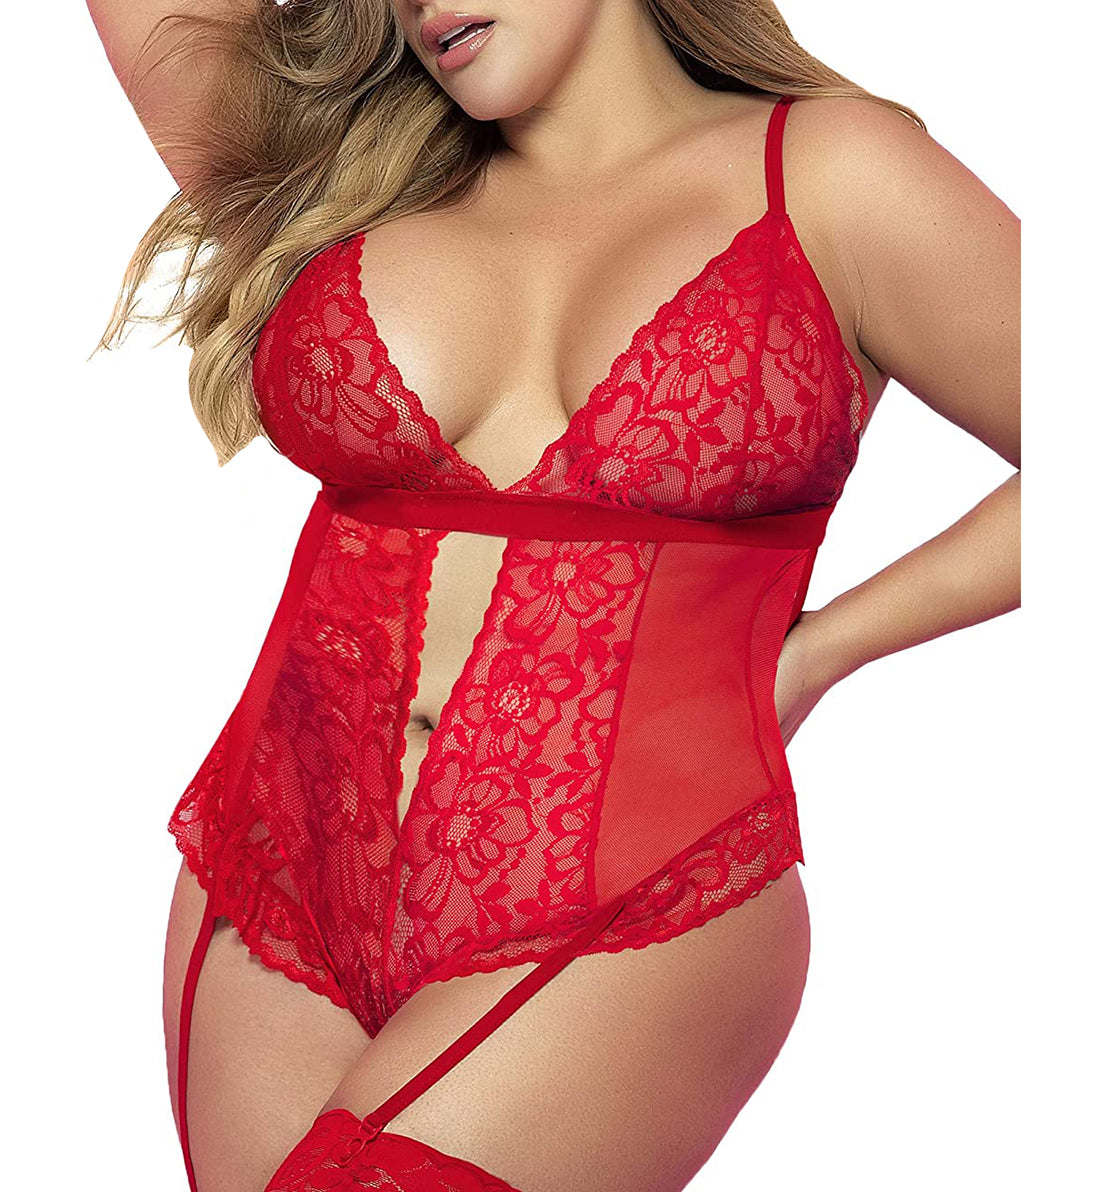 Mapale Plunge Brazilian Back Teddy with Attached Garter Straps PLUS (8568X),1X/2X,Red - Red,1X/2X